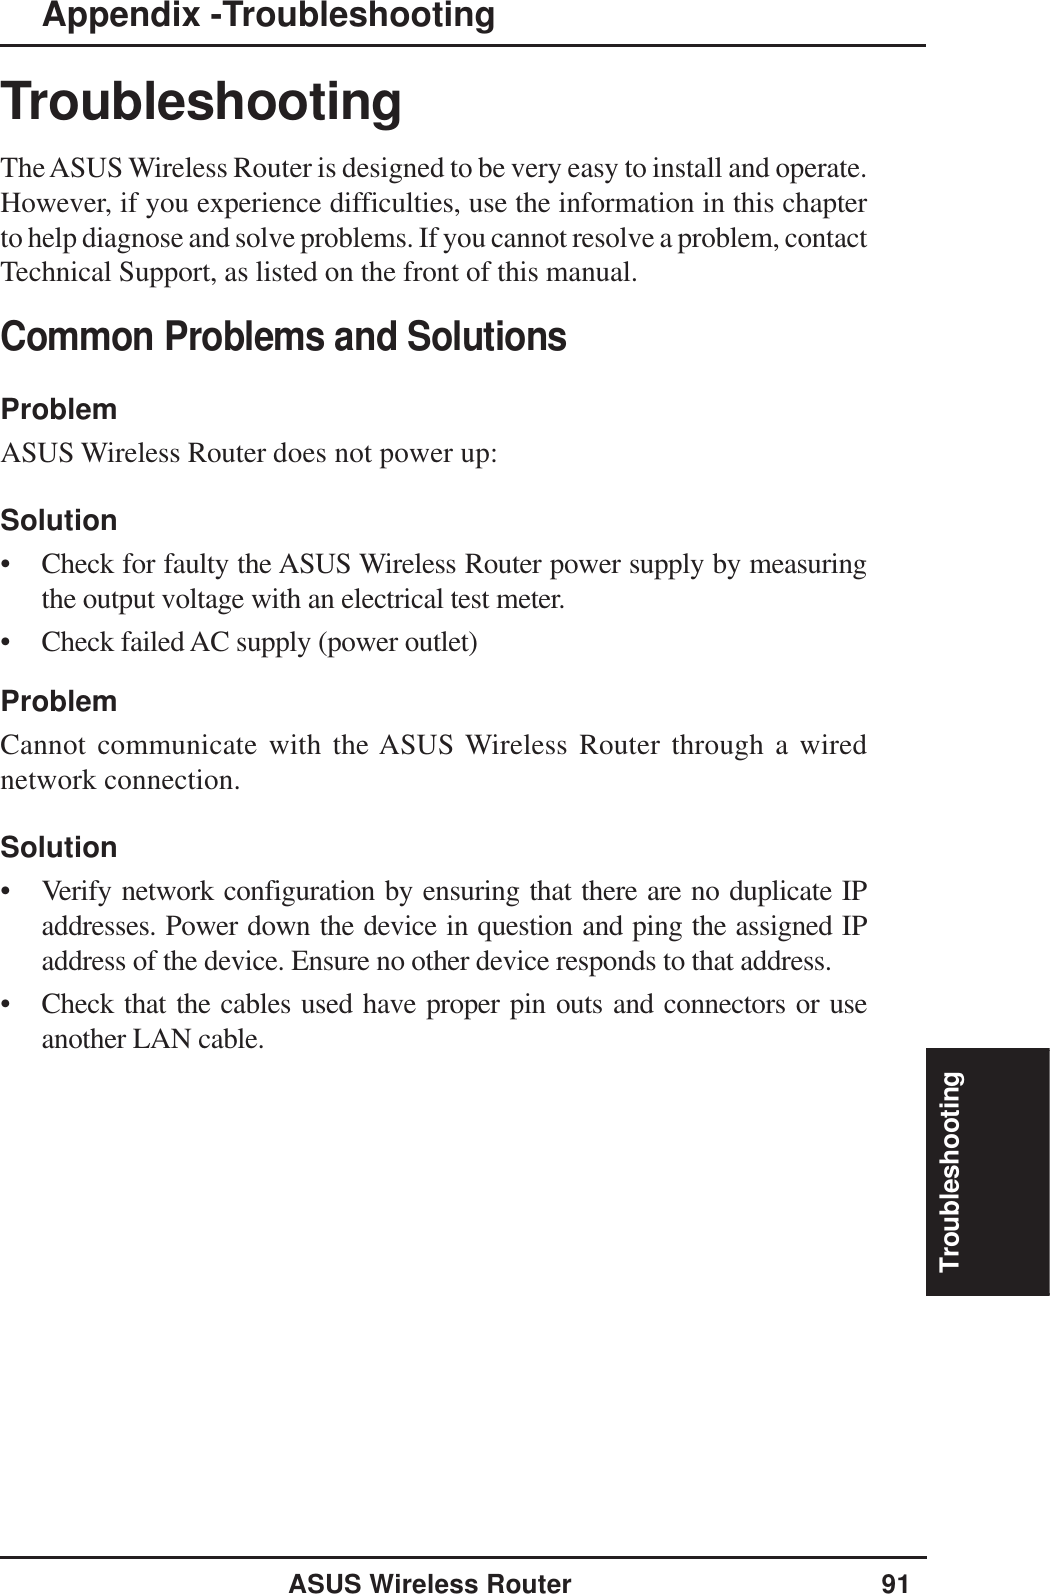 TroubleshootingASUS Wireless Router 91TroubleshootingThe ASUS Wireless Router is designed to be very easy to install and operate.However, if you experience difficulties, use the information in this chapterto help diagnose and solve problems. If you cannot resolve a problem, contactTechnical Support, as listed on the front of this manual.Common Problems and SolutionsProblemASUS Wireless Router does not power up:Solution• Check for faulty the ASUS Wireless Router power supply by measuringthe output voltage with an electrical test meter.• Check failed AC supply (power outlet)ProblemCannot communicate with the ASUS Wireless Router through a wirednetwork connection.Solution• Verify network configuration by ensuring that there are no duplicate IPaddresses. Power down the device in question and ping the assigned IPaddress of the device. Ensure no other device responds to that address.• Check that the cables used have proper pin outs and connectors or useanother LAN cable.Appendix -Troubleshooting